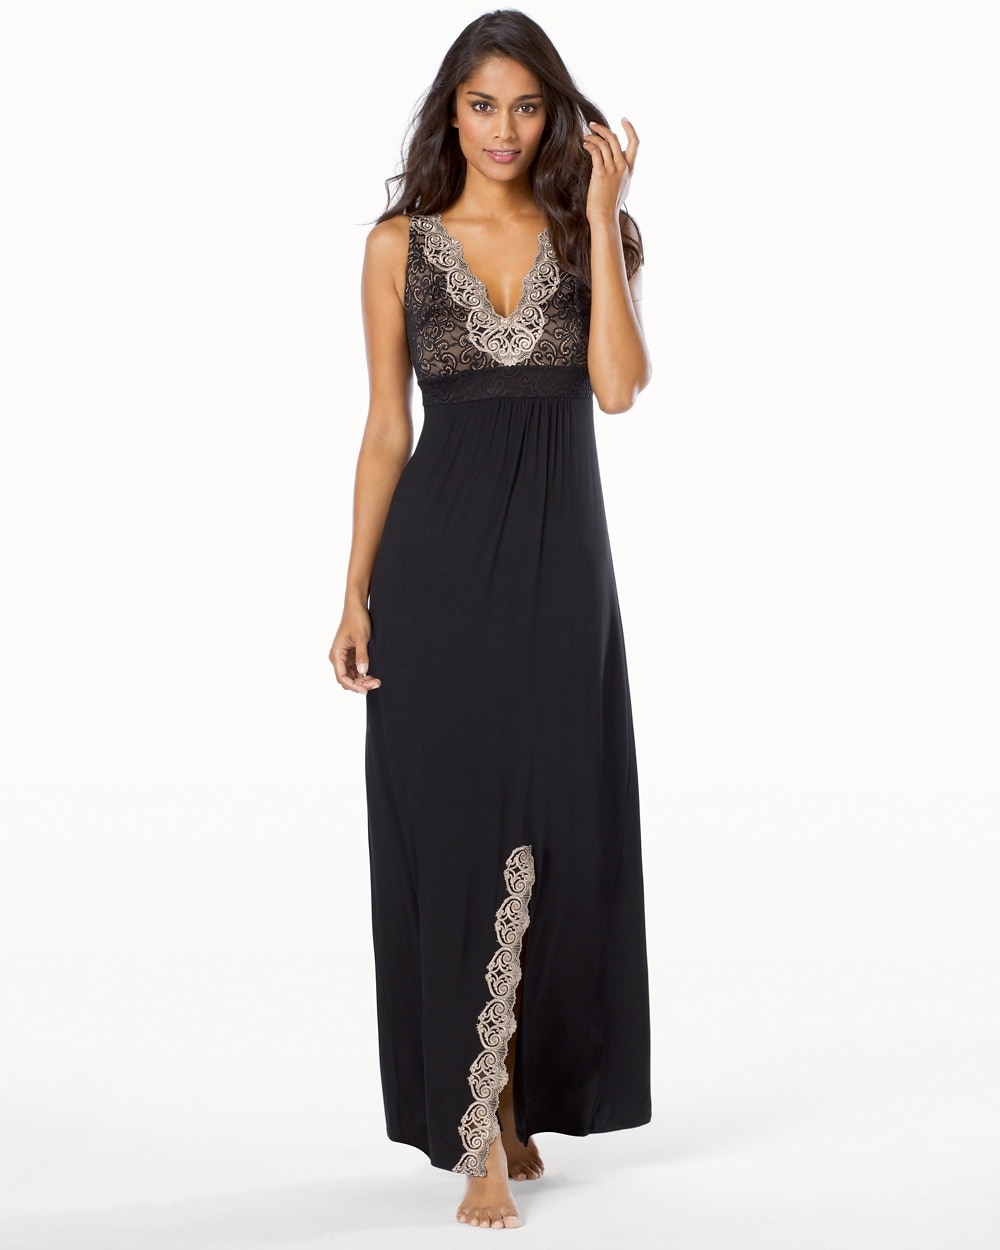 Limited Edition Sensuous Scroll Long Nightgown - Shop Chemises & Gowns ...